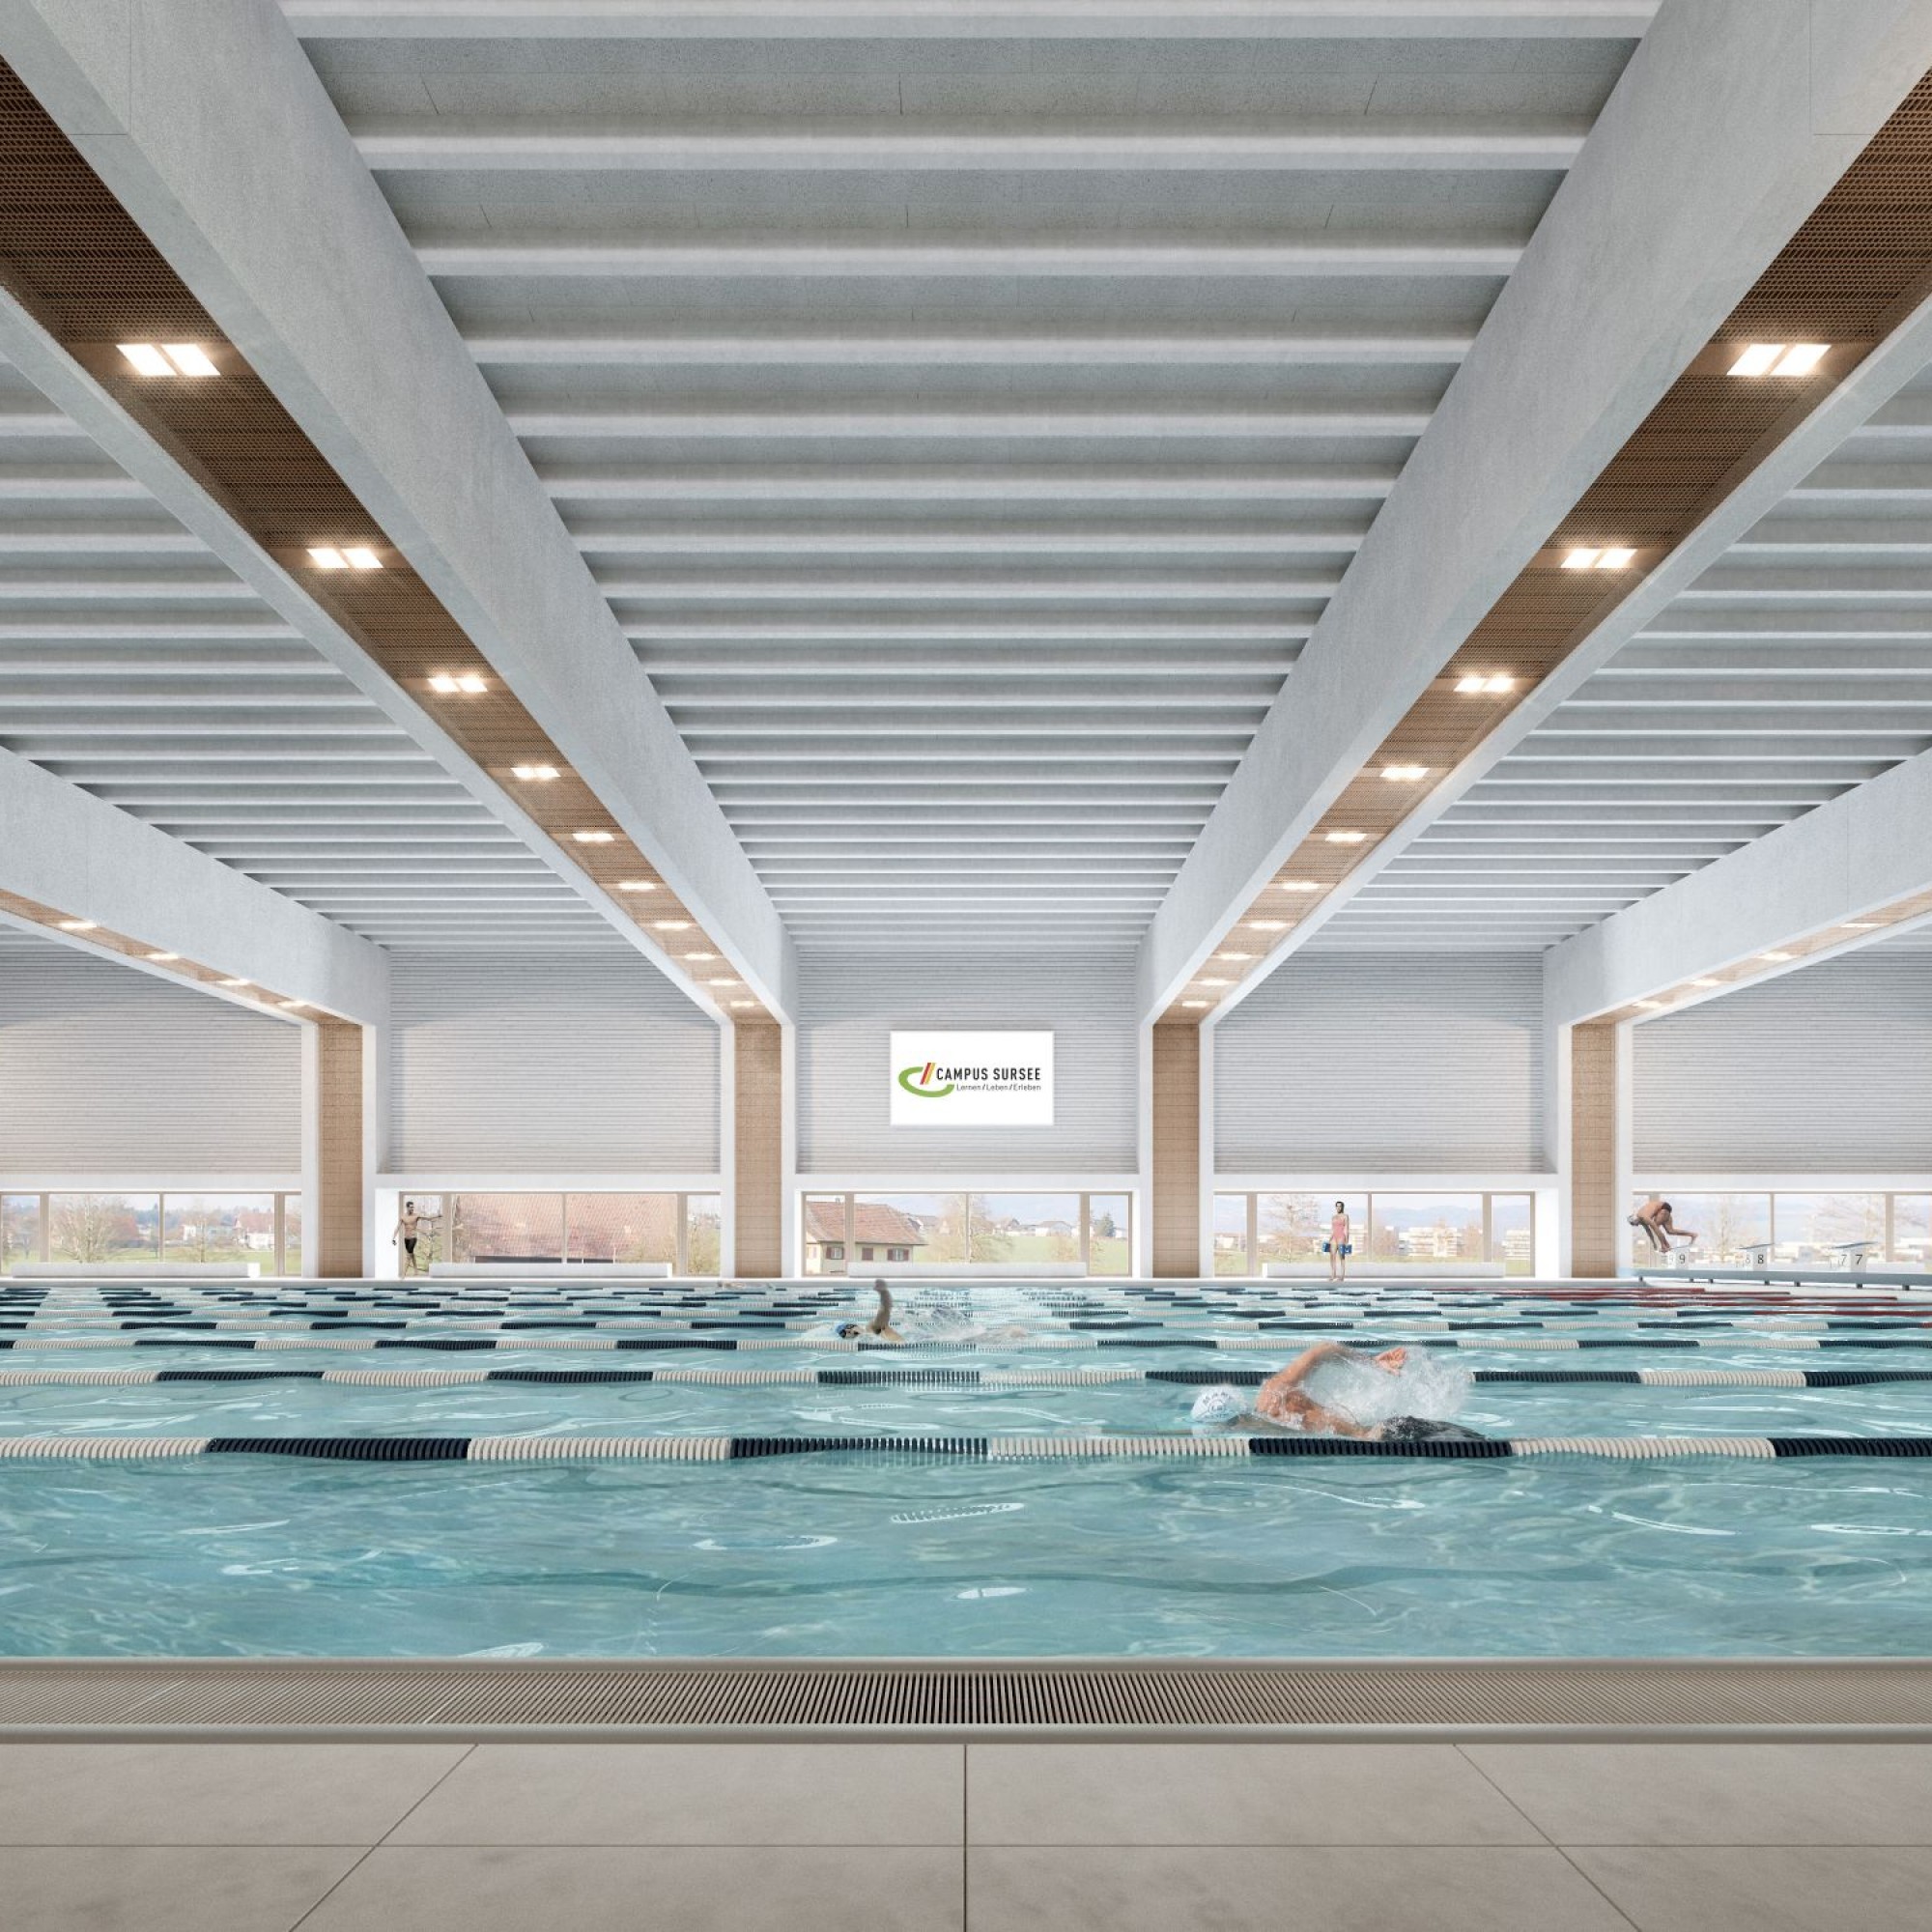 Olympic Pool Campus Sursee